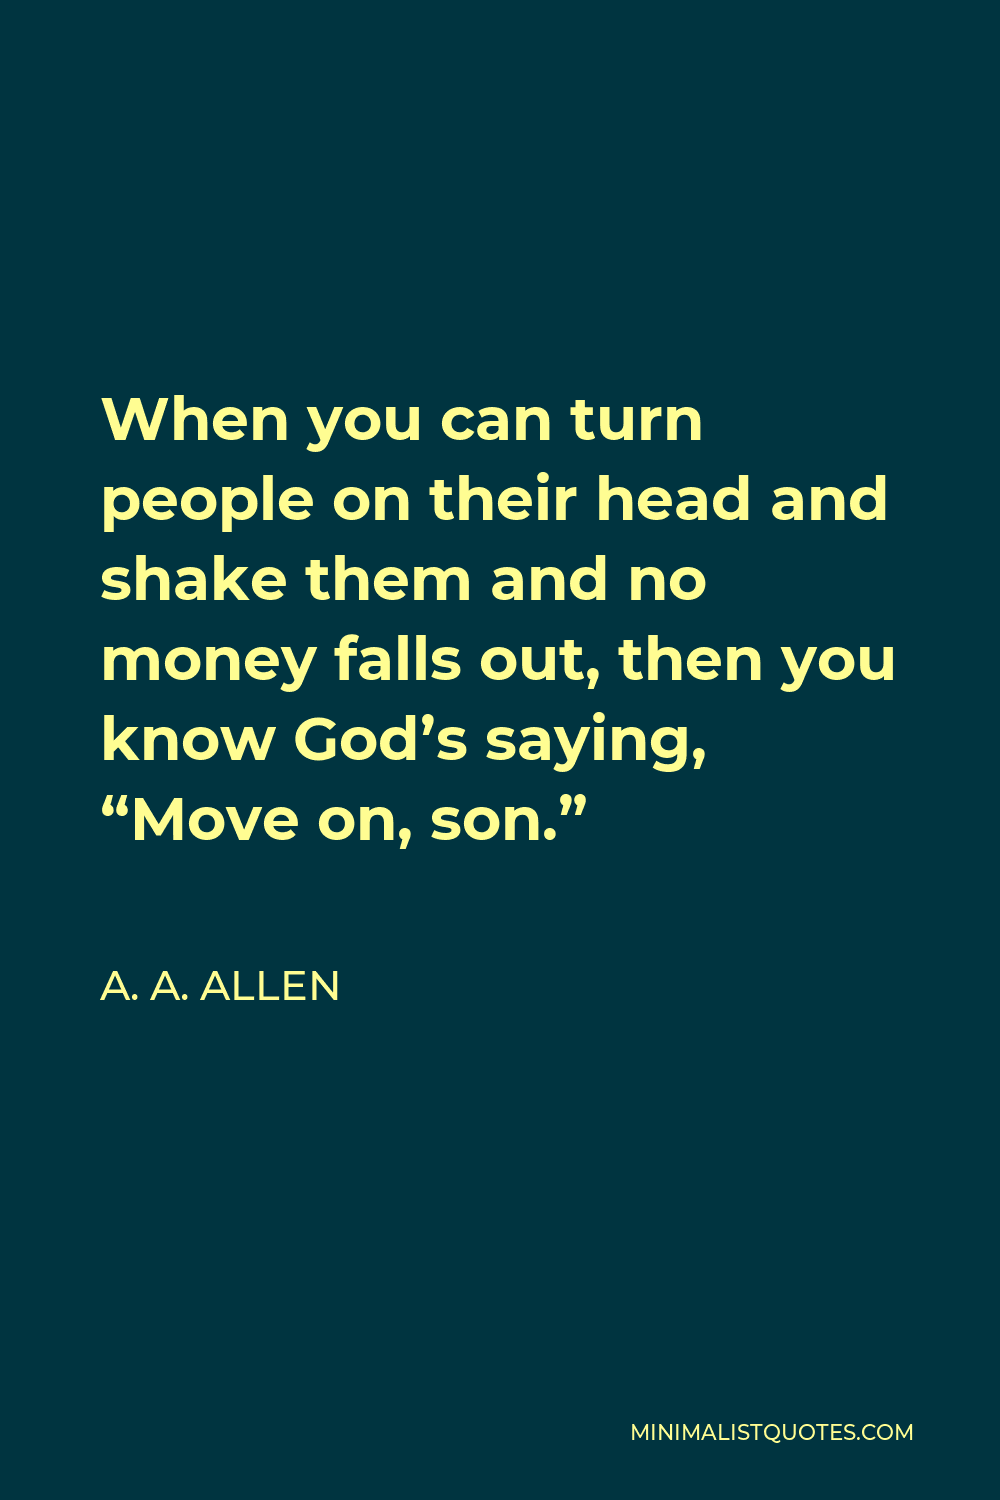 A. A. Allen Quote - When you can turn people on their head and shake them and no money falls out, then you know God’s saying, “Move on, son.”